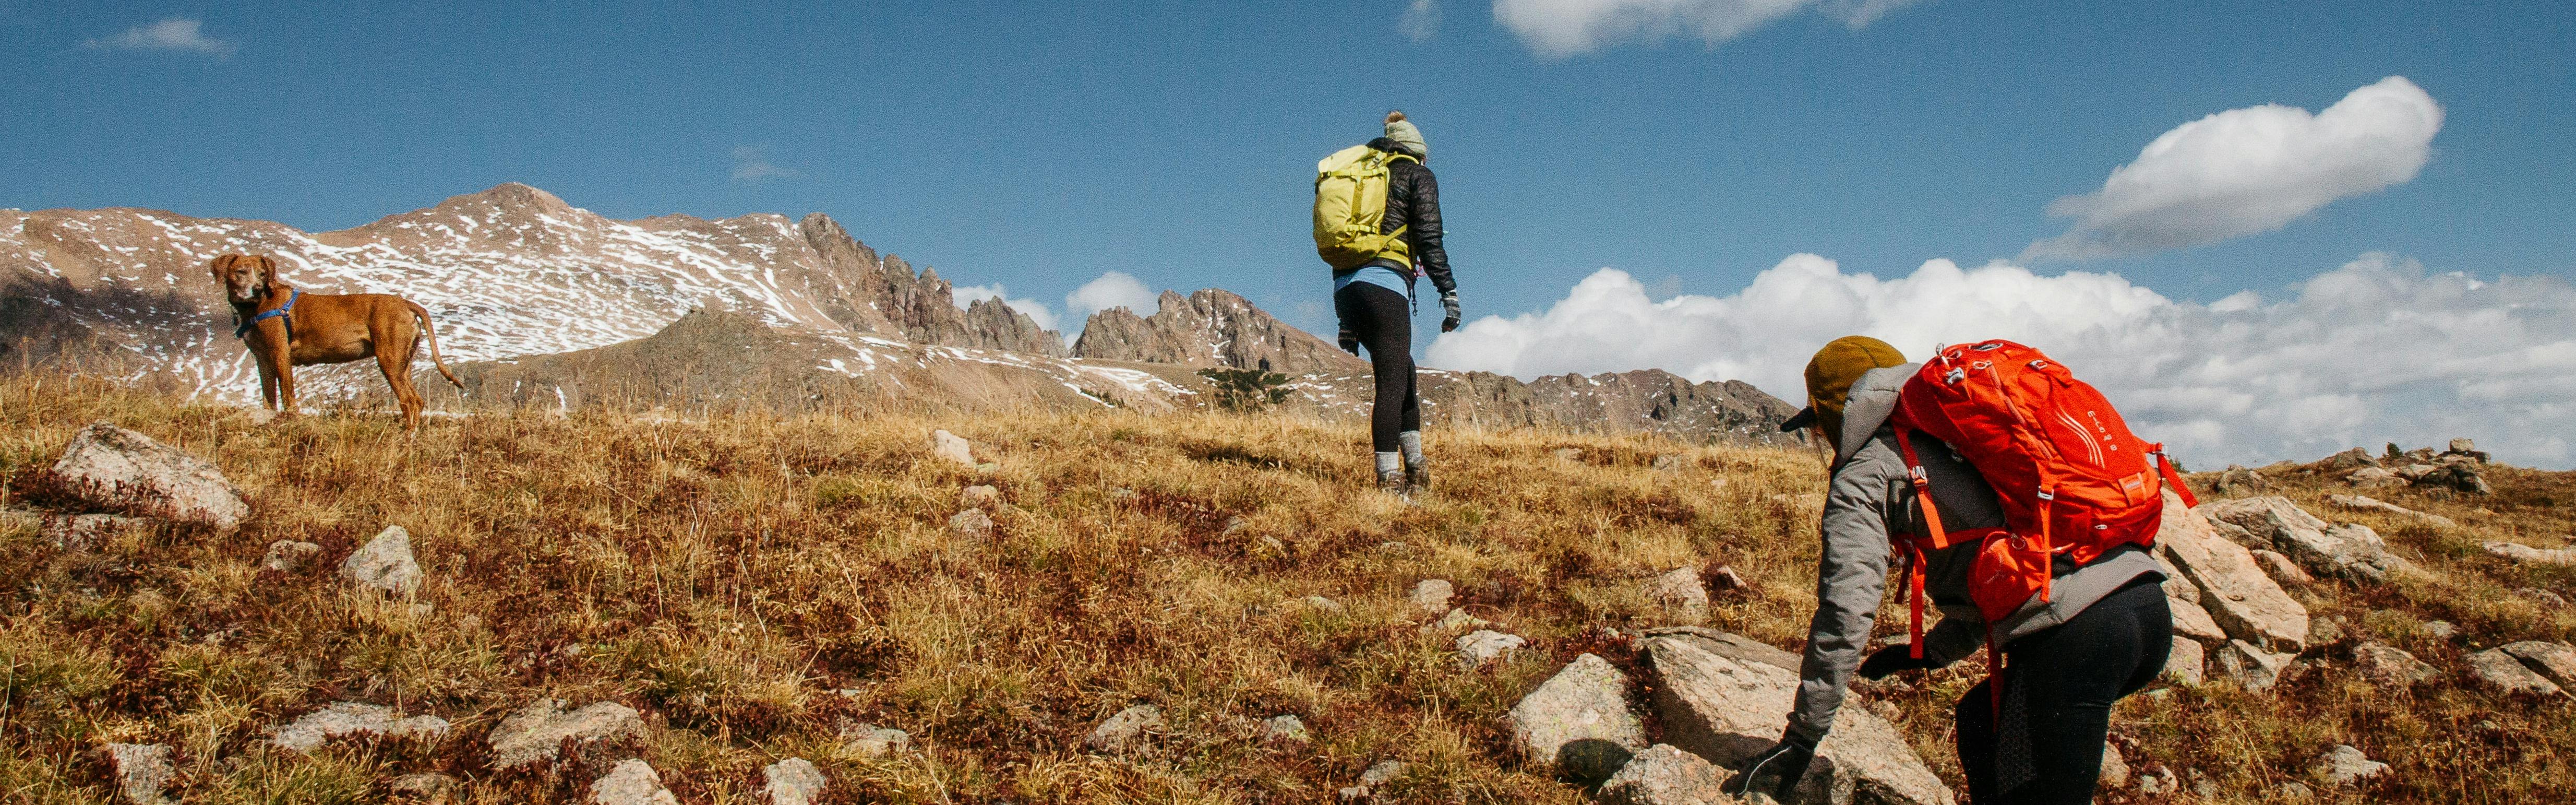 What to Wear Hiking: Experts Share the Best Hiking Clothes